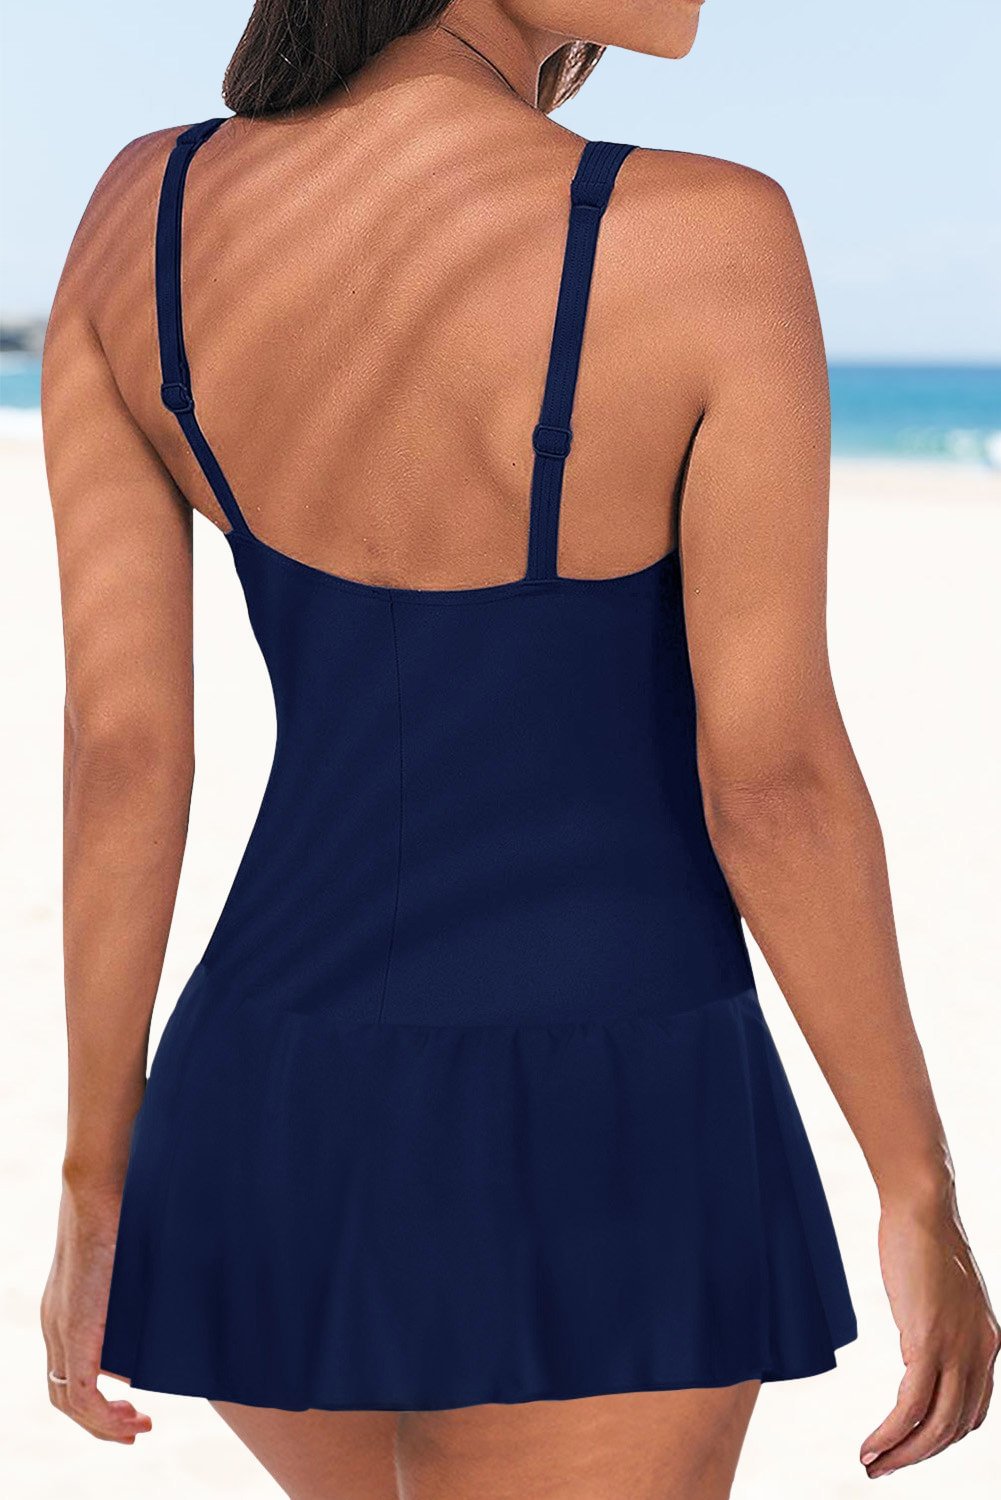 Women’s Solid Ruched Swimdress Push Up Padded Lace Up One Piece ...